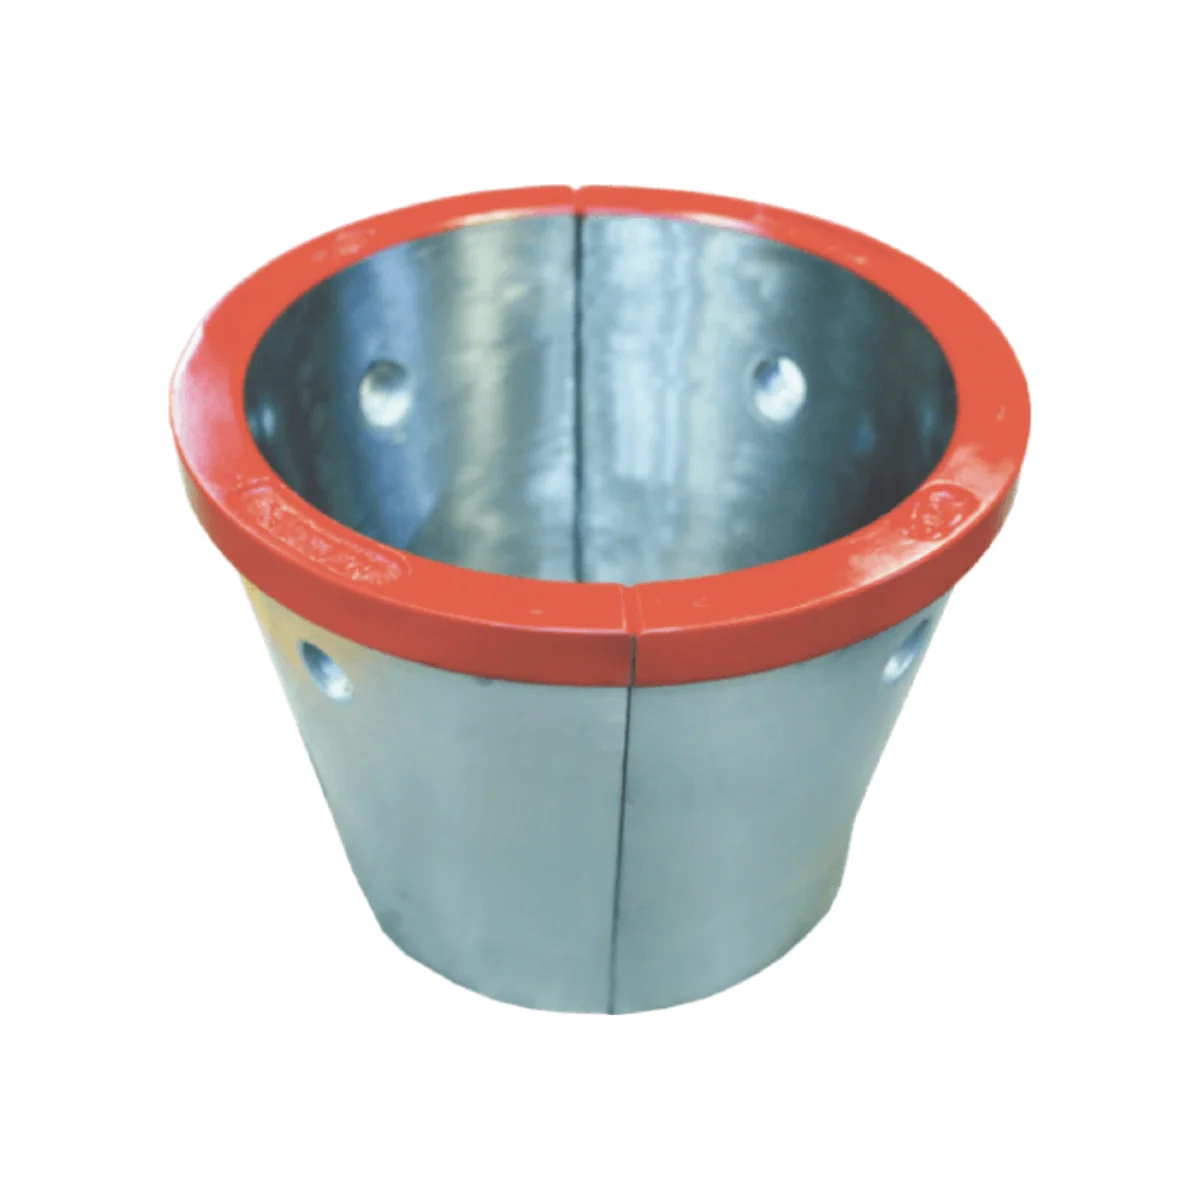 Casing Bushing Bowl No. 2 securely holds casing strings, ensuring precise alignment and reliable support in oilfield drilling operations.